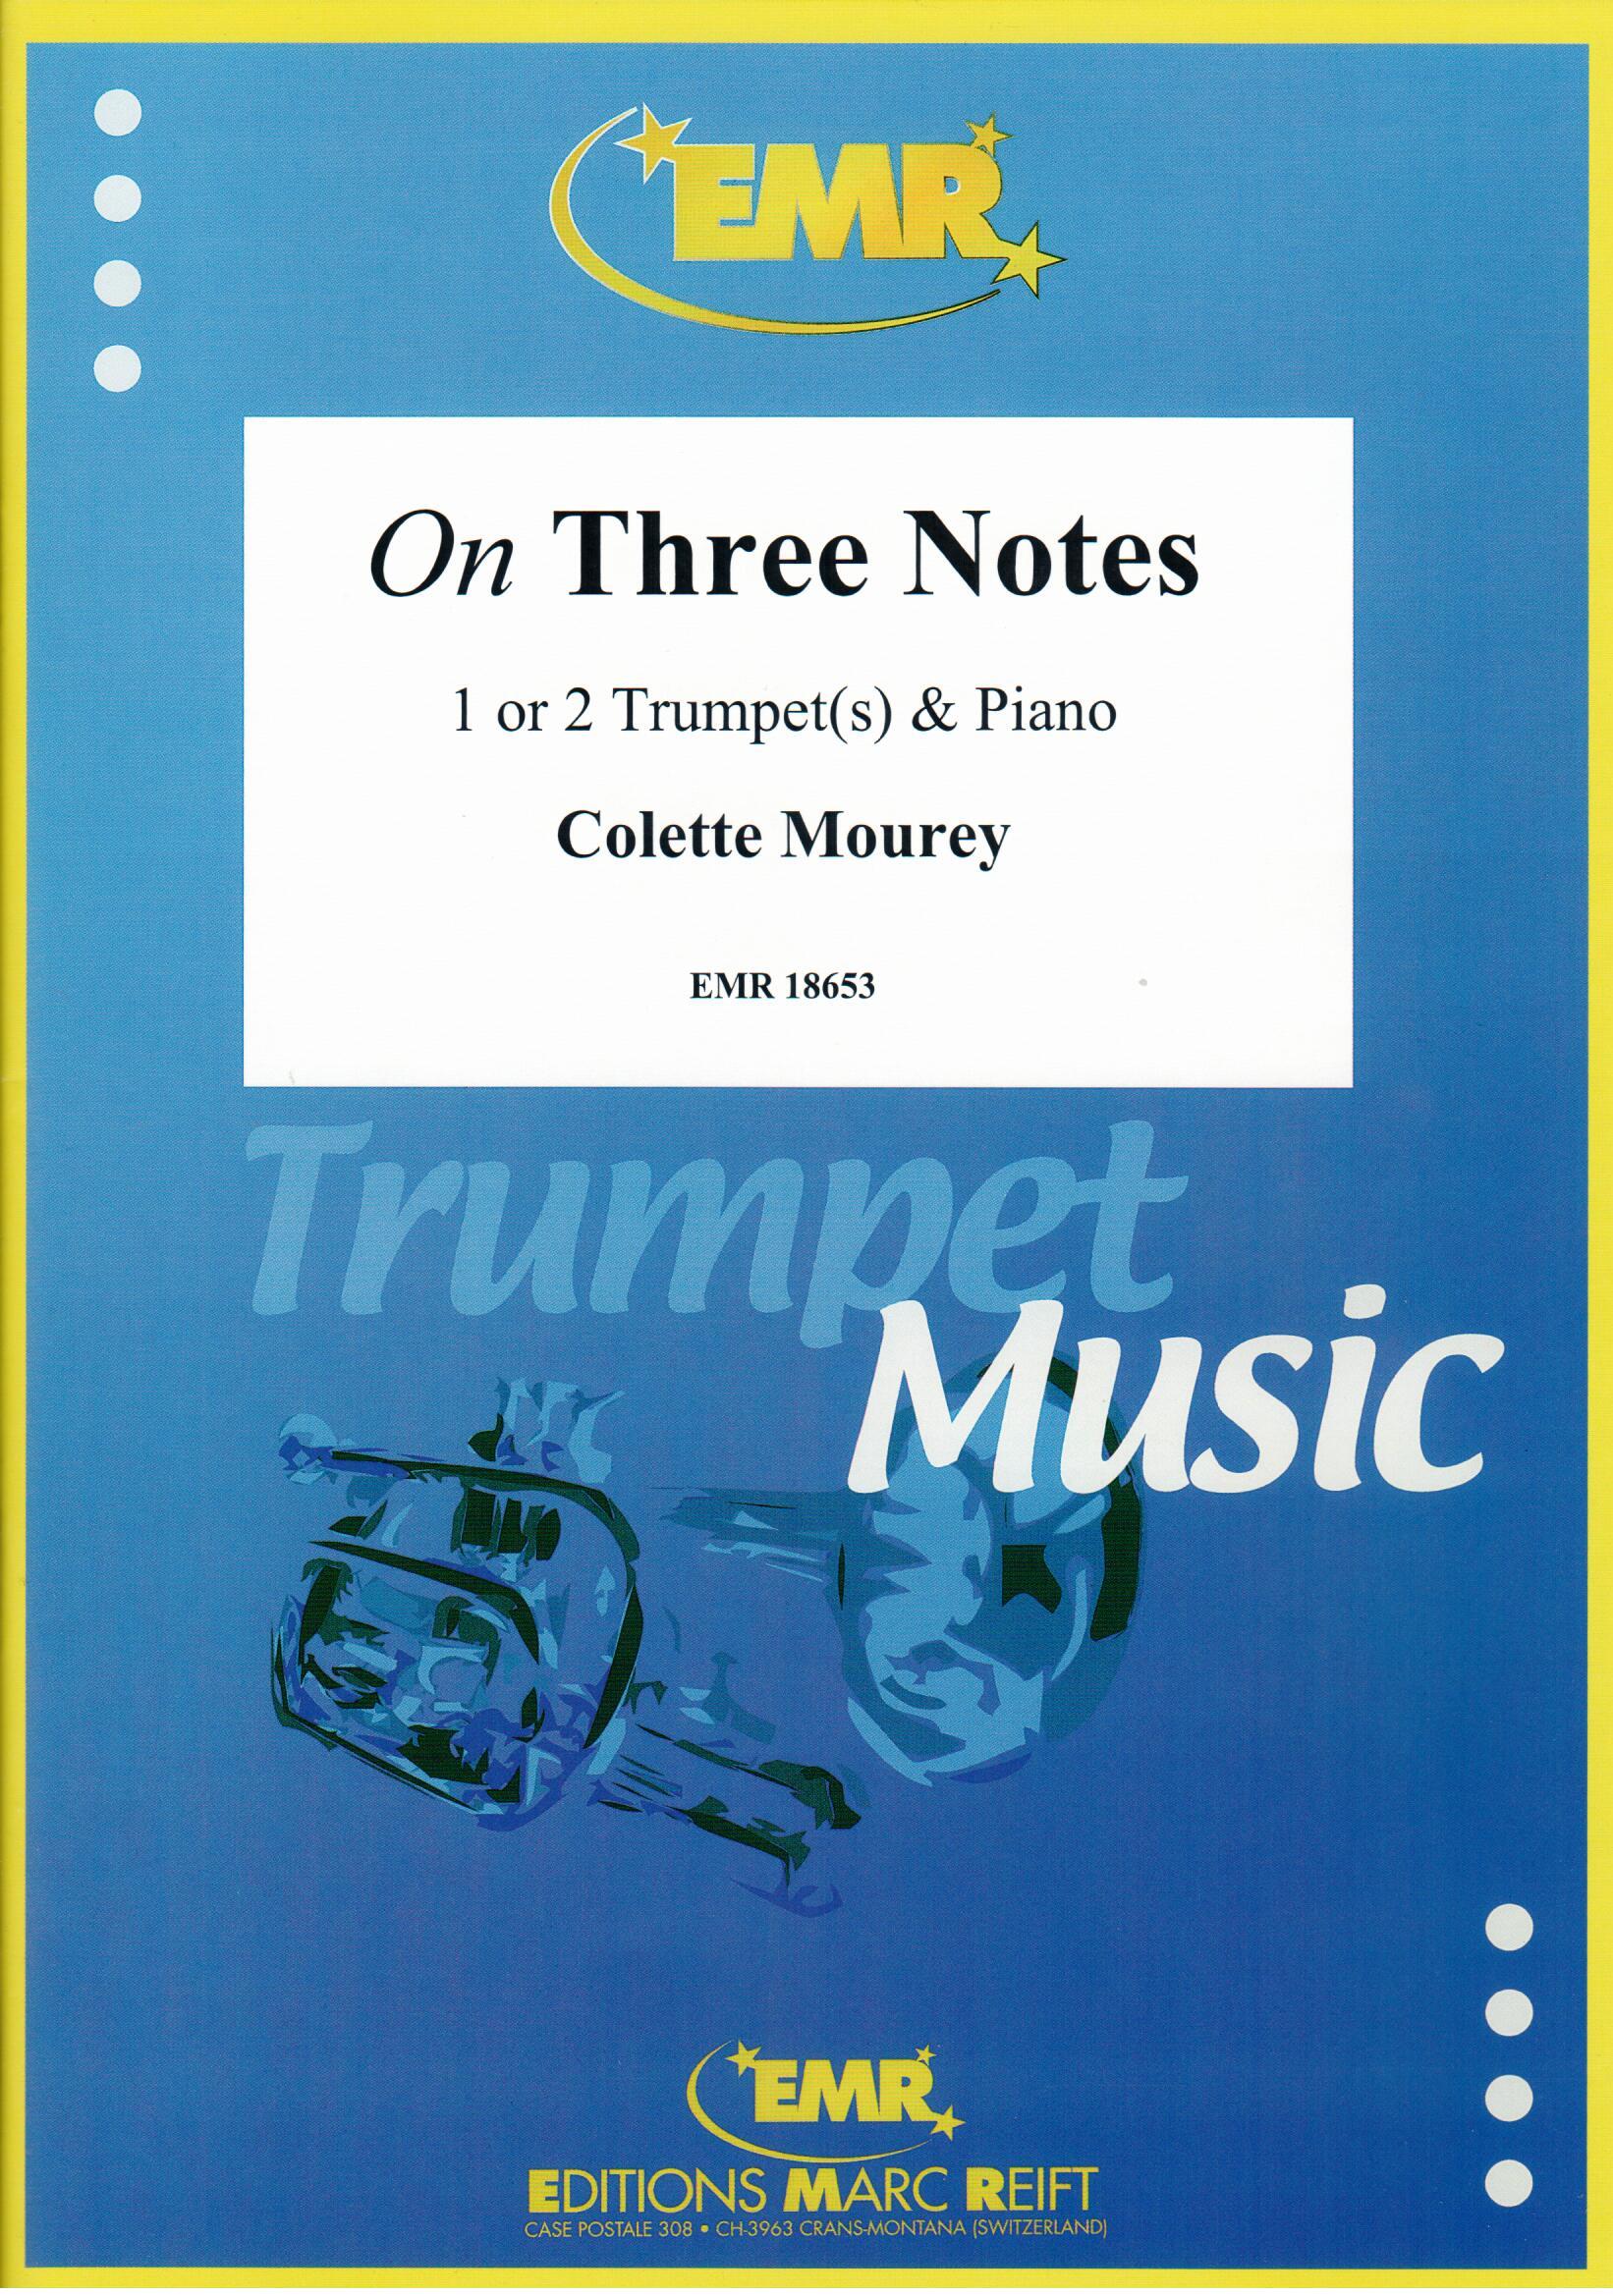 ON THREE NOTES, SOLOS - B♭. Cornet/Trumpet with Piano